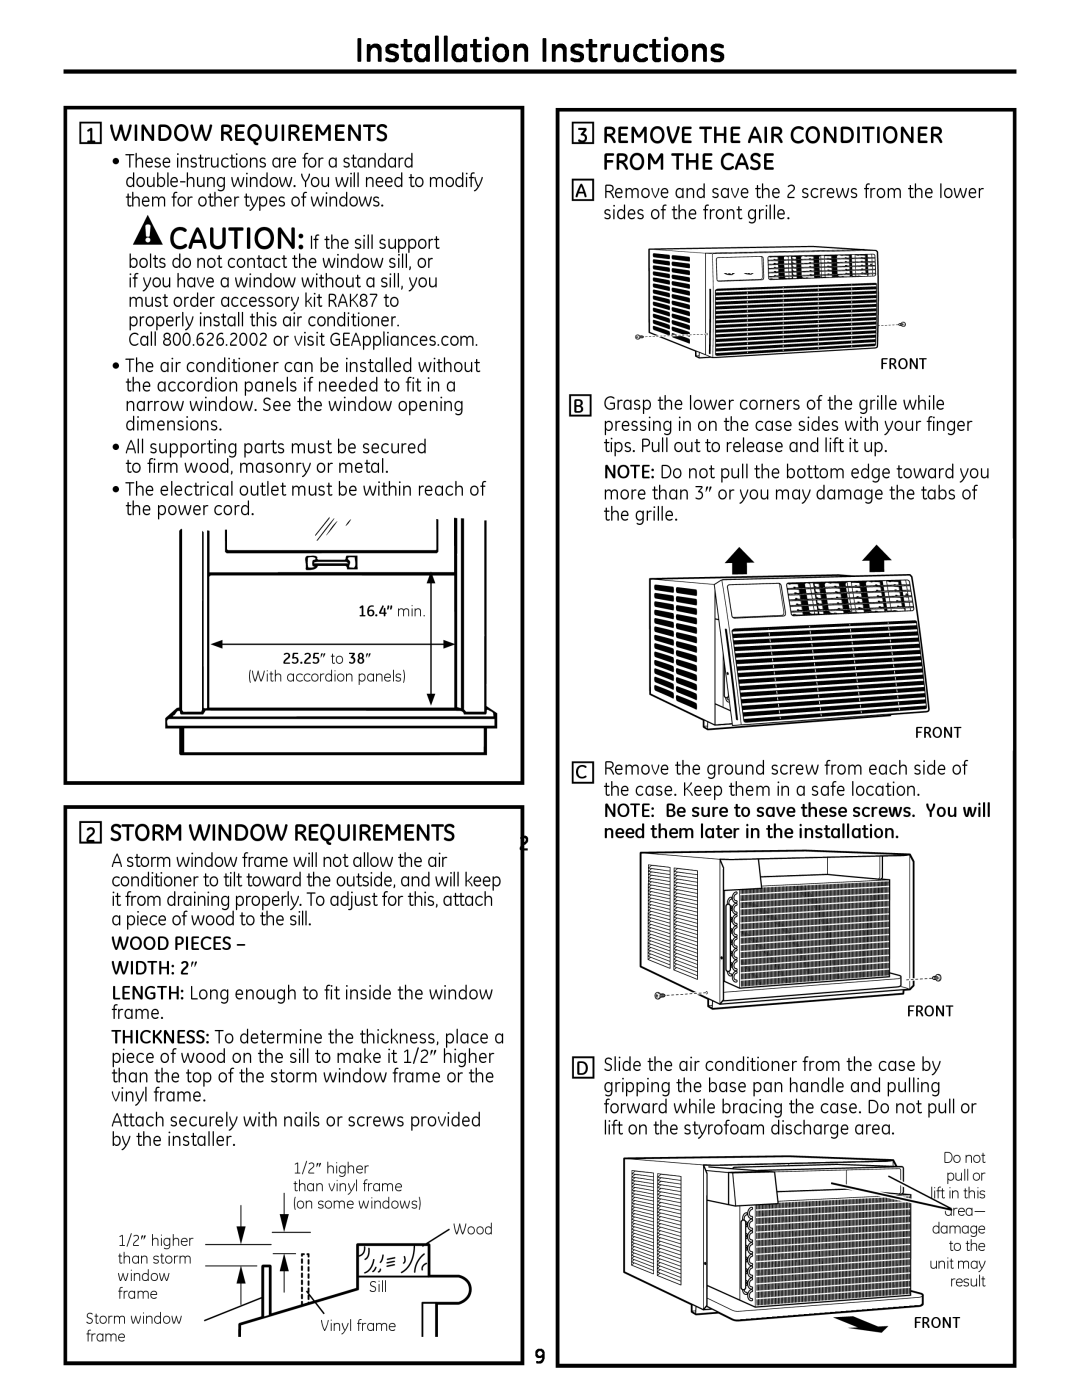 GE 880 Storm Window Requirements, Remove The Air Conditioner From The Case, Installation Instructions 